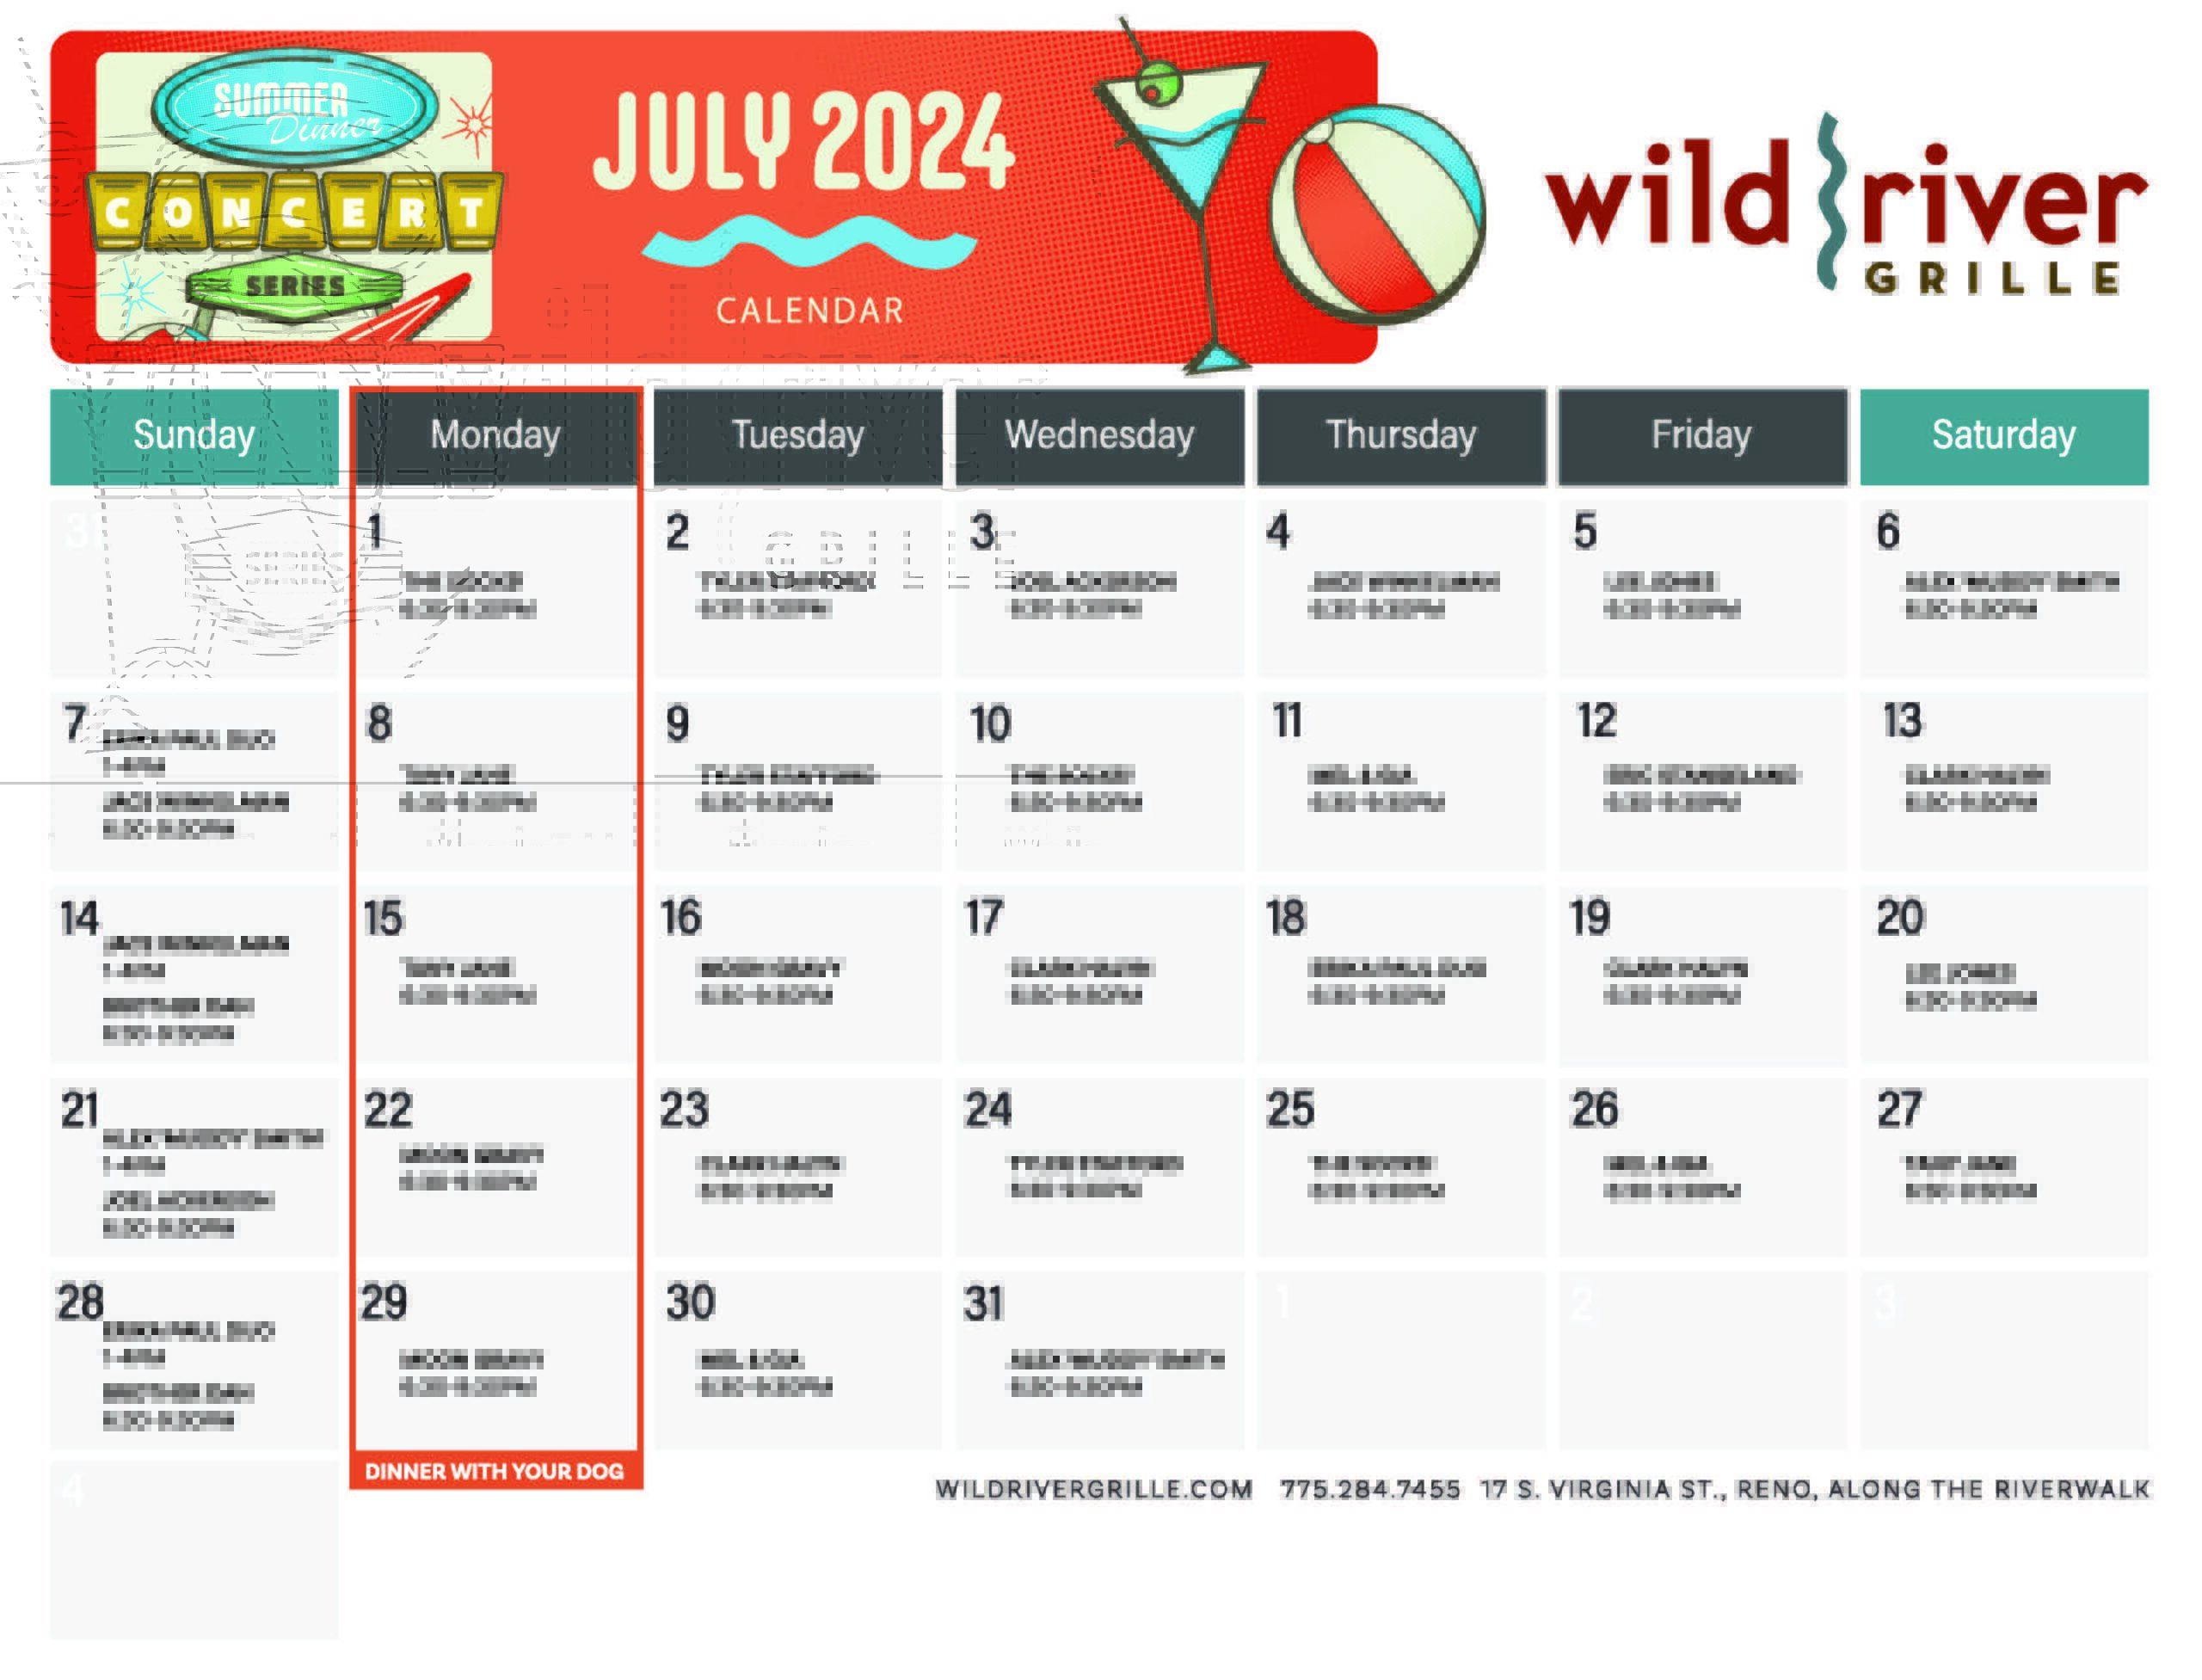 Wild River Grille's calendar of their 2024 Summer Concert Series lineup for the month of July.